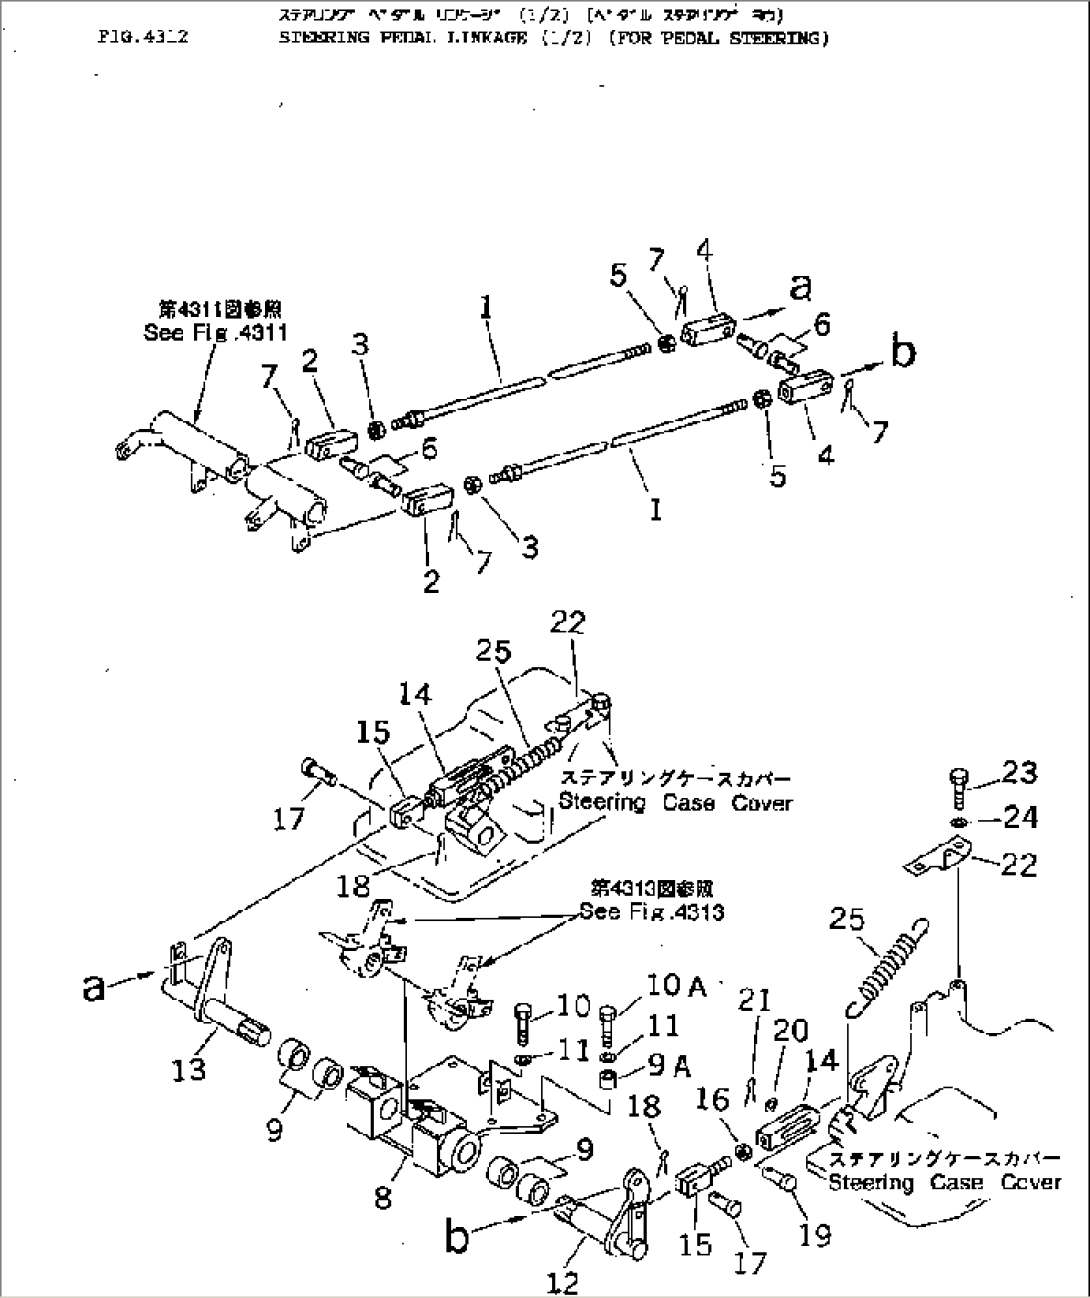 STEERING PEDAL LINKAGE (1/2) (FOR PEDAL STEERING)